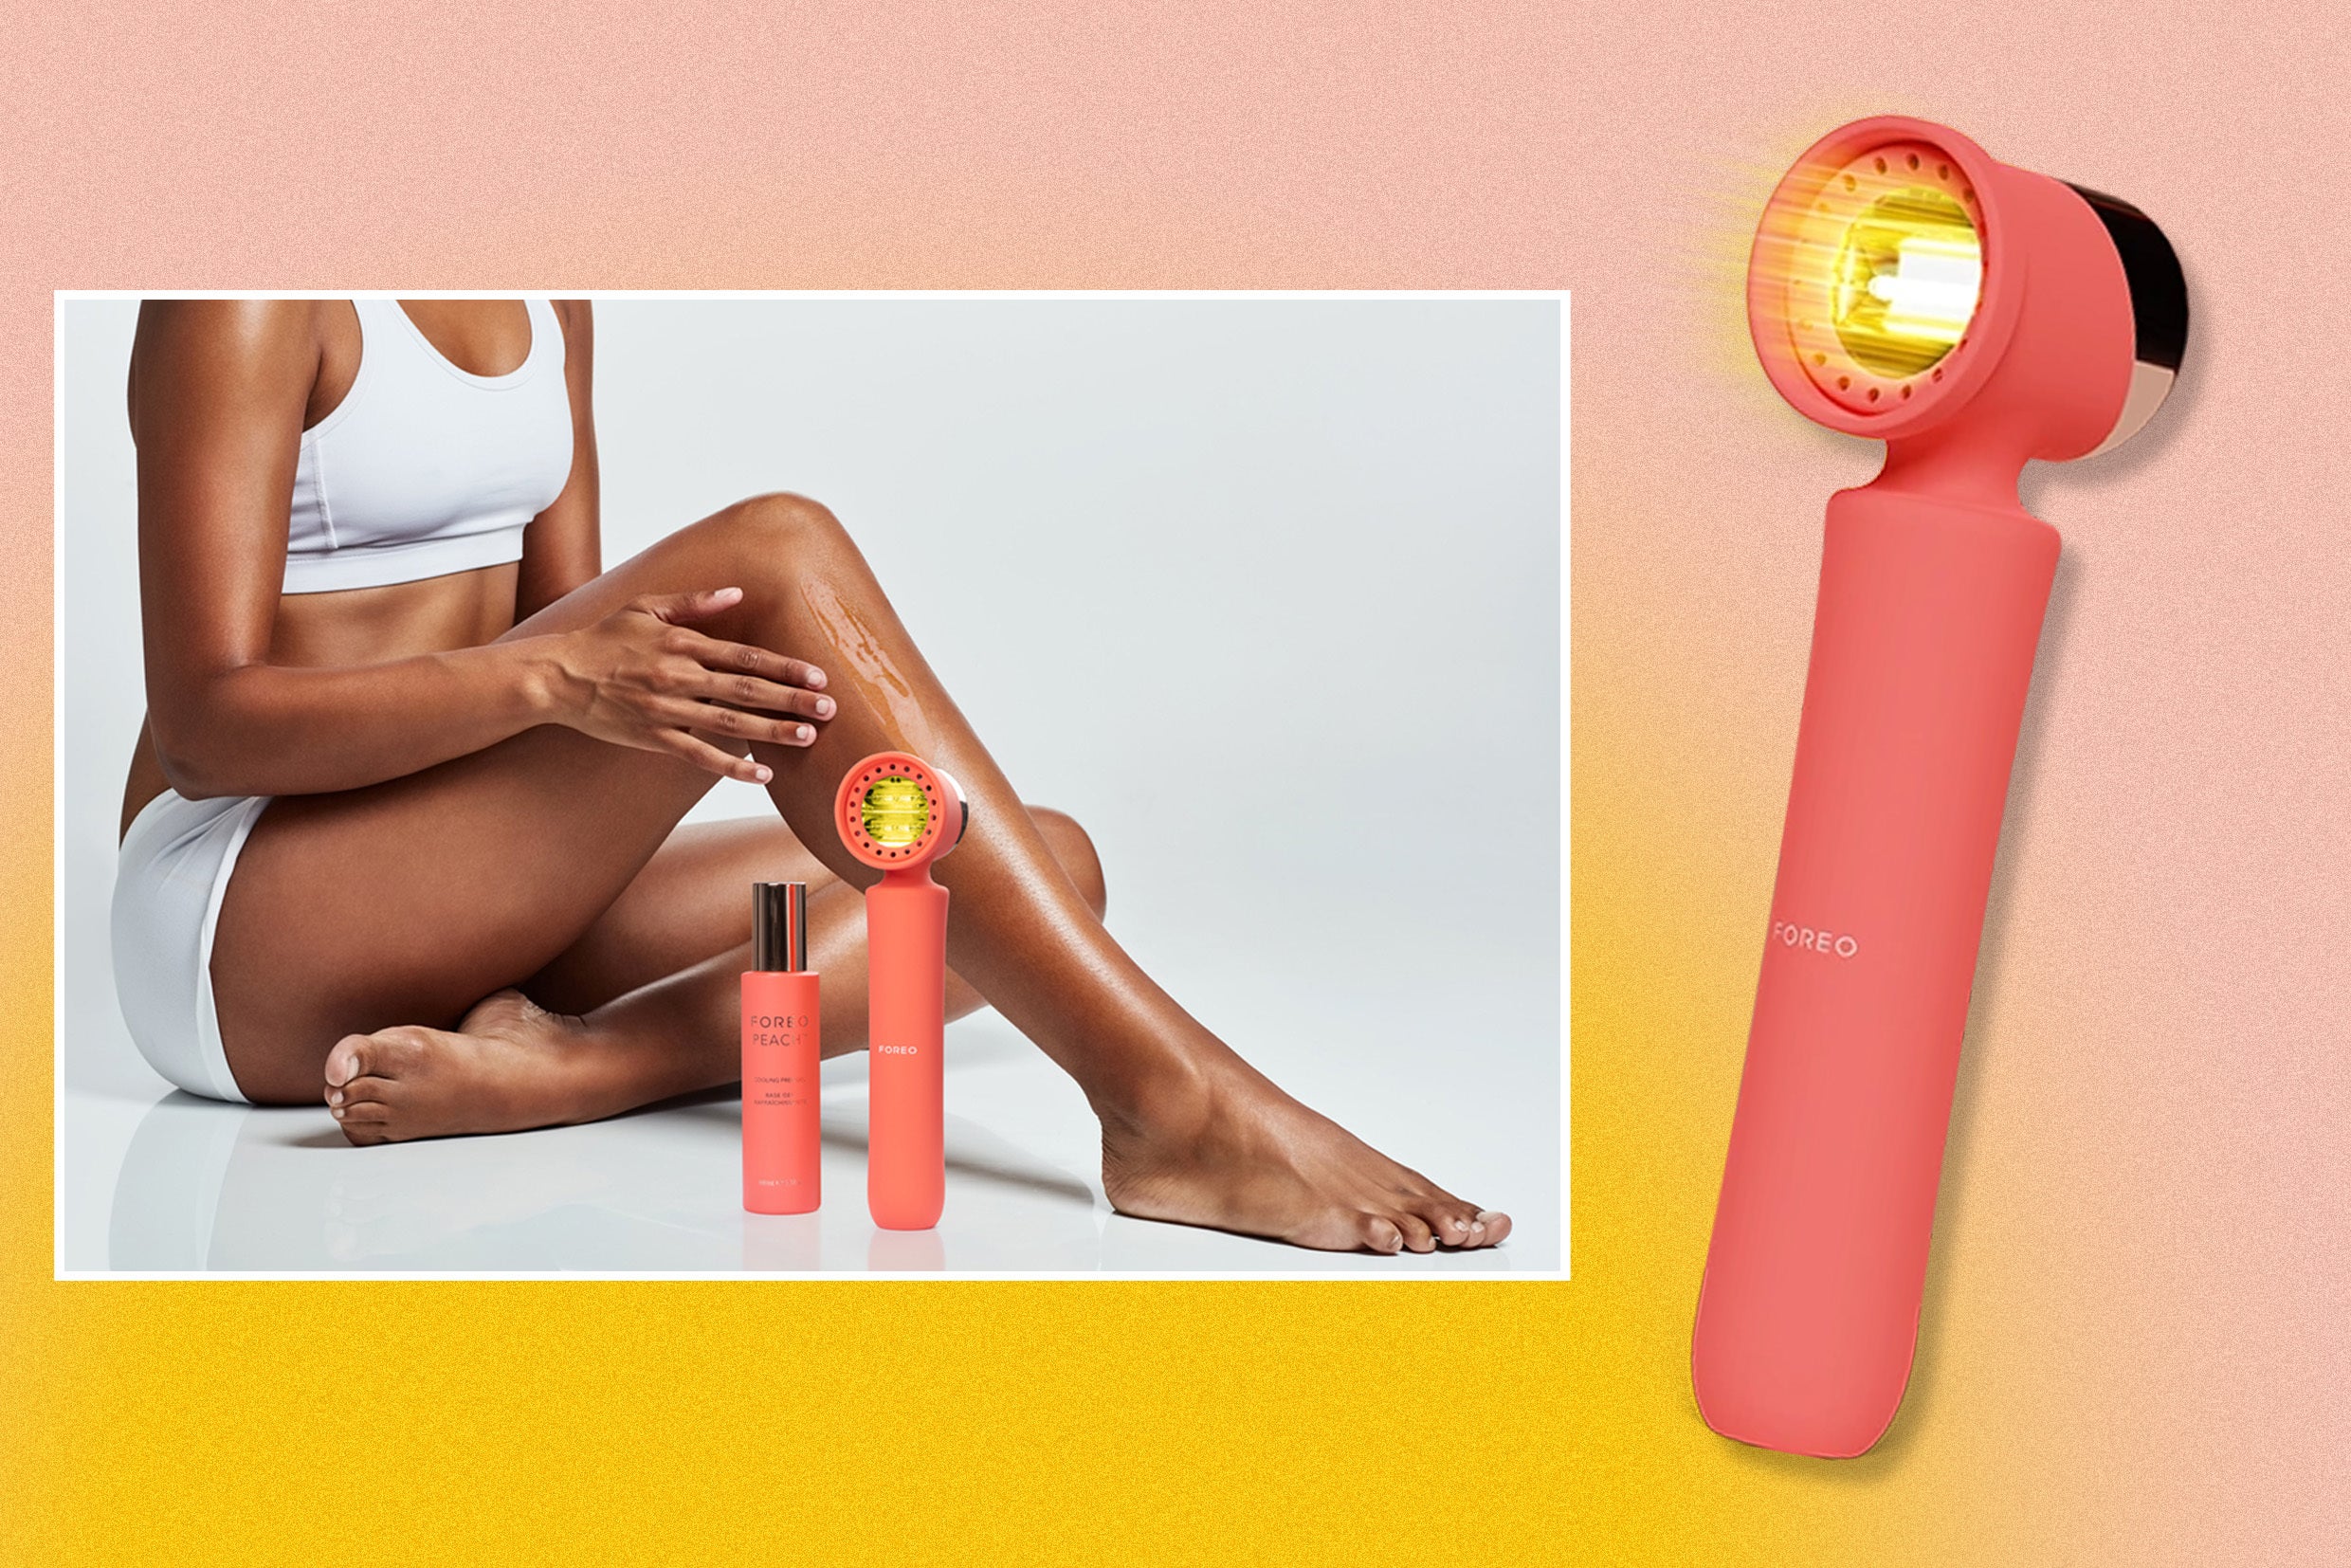 Foreo peach 2 IPL review | The Independent